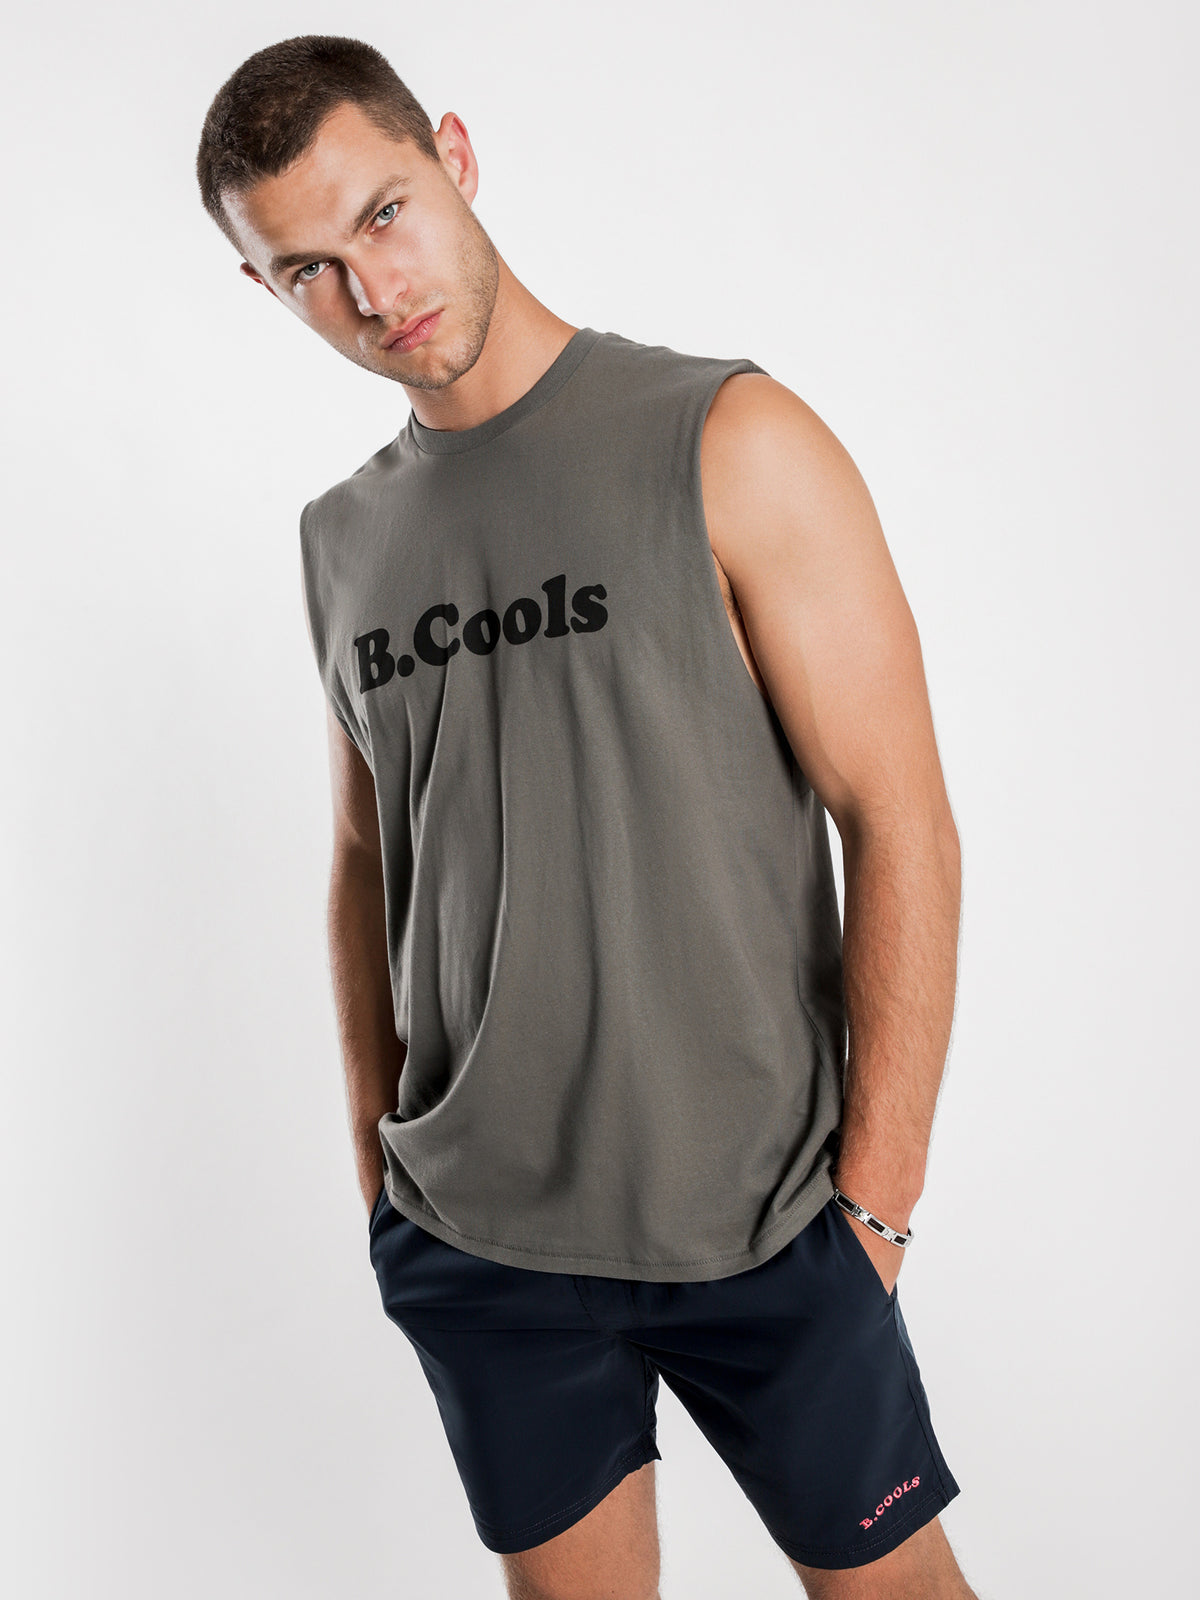 B.Cools Retro Muscle T-Shirt in Bottle Green